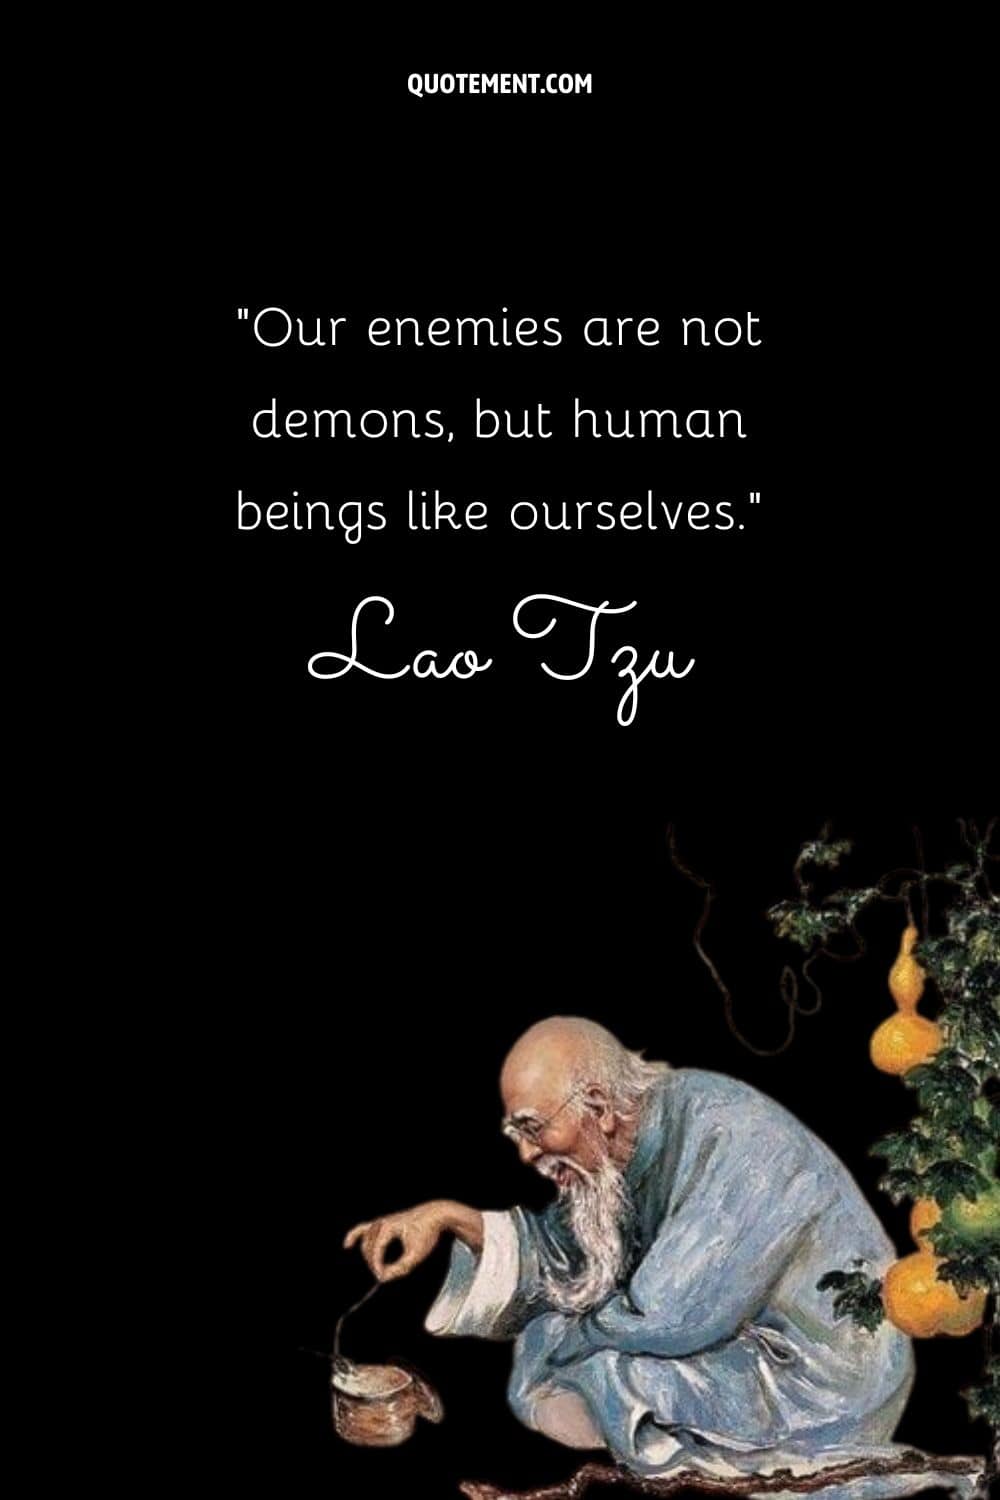 Our enemies are not demons, but human beings like ourselves